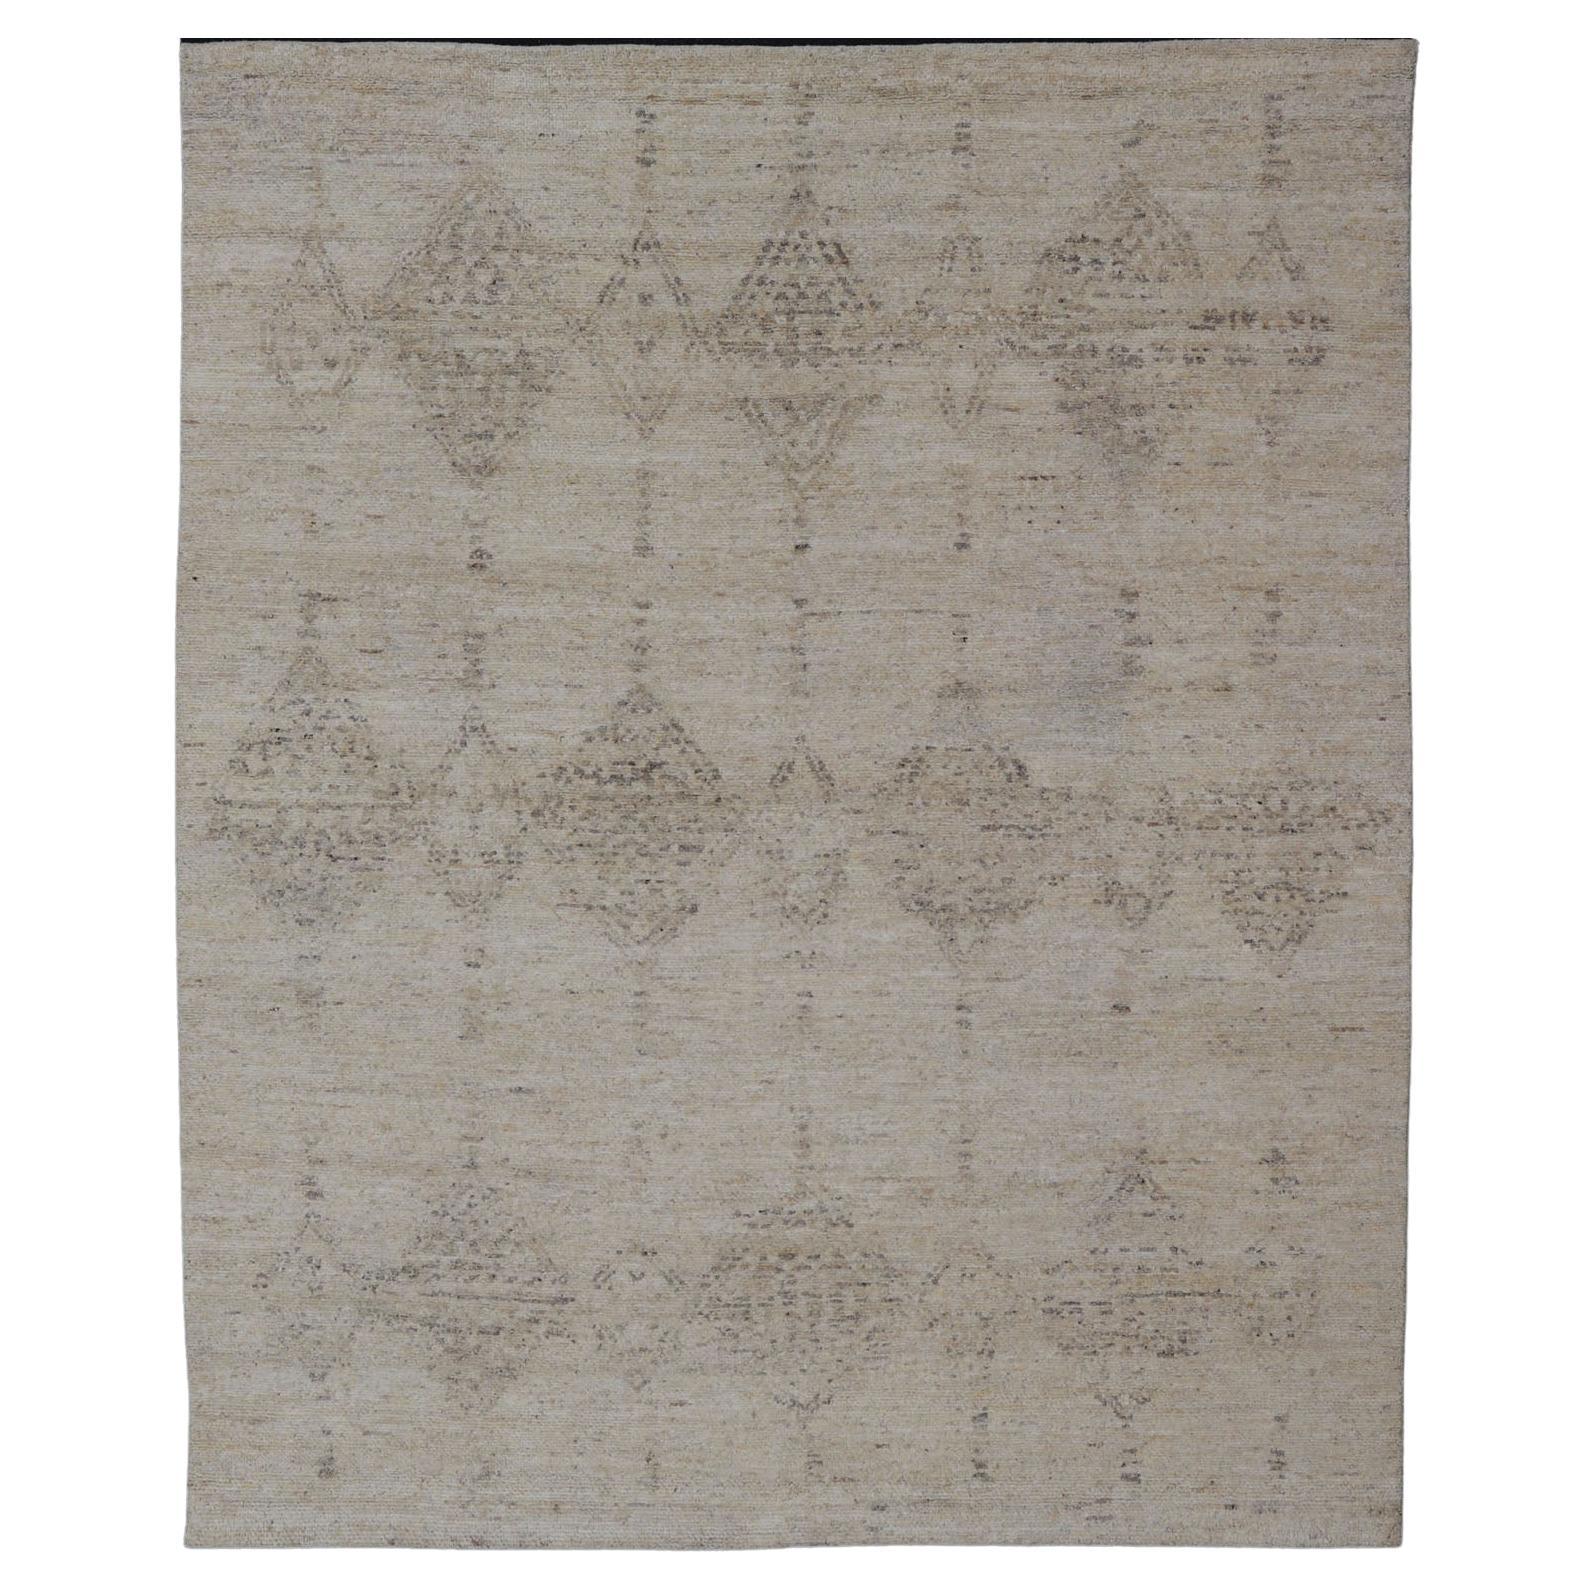 Modern Rug in Creamy Beige Color Tones and Moroccan Style Diamonds in Light Gray For Sale